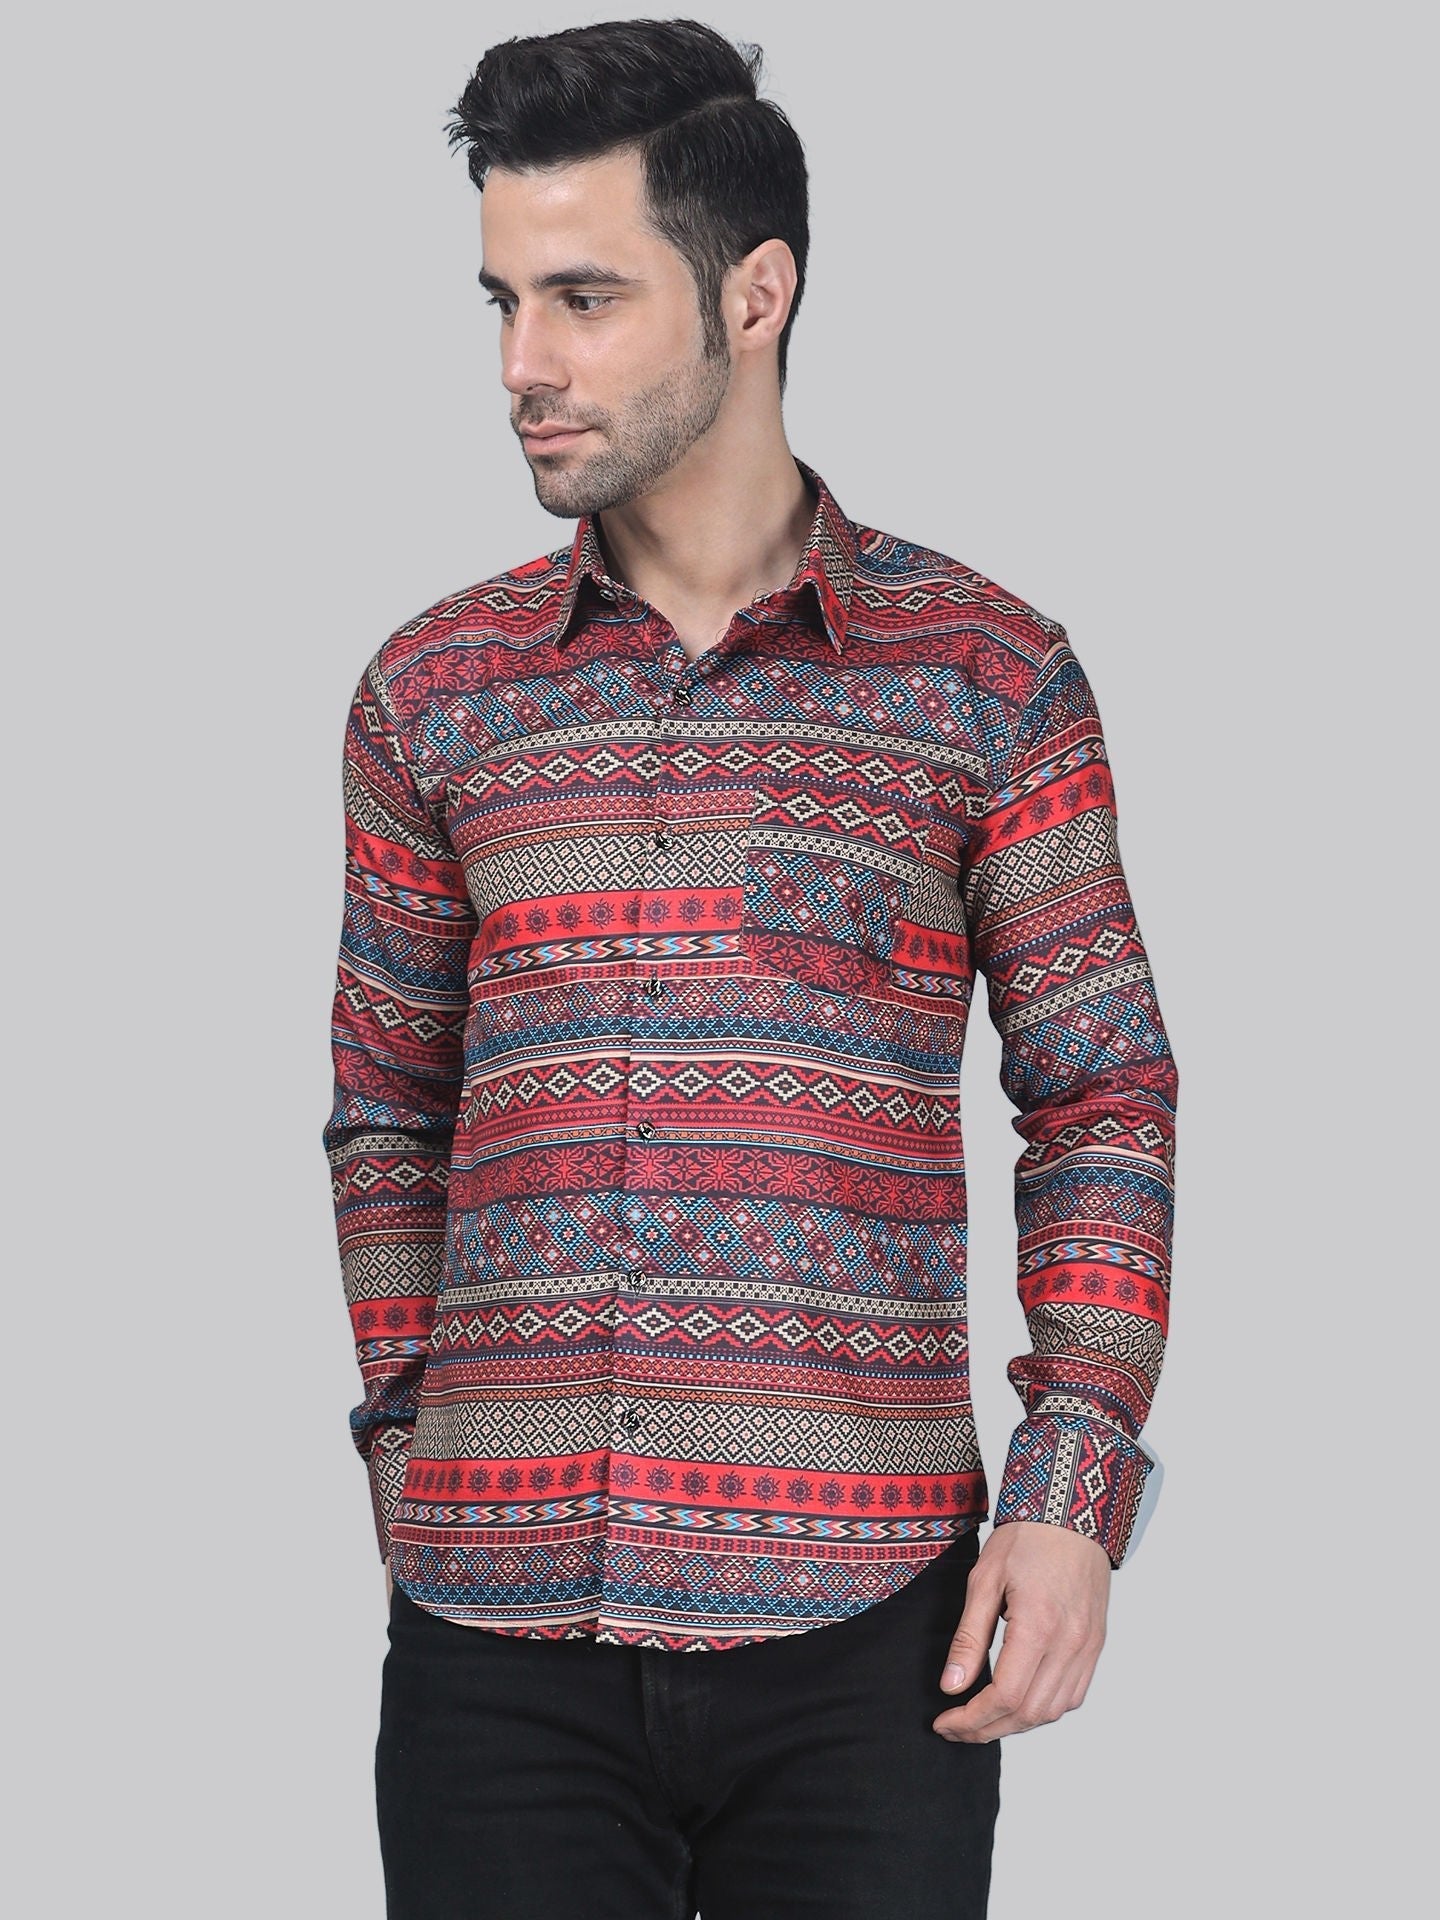 Futuristic Men's Printed Full Sleeve Casual Linen Shirt - TryBuy® USA🇺🇸